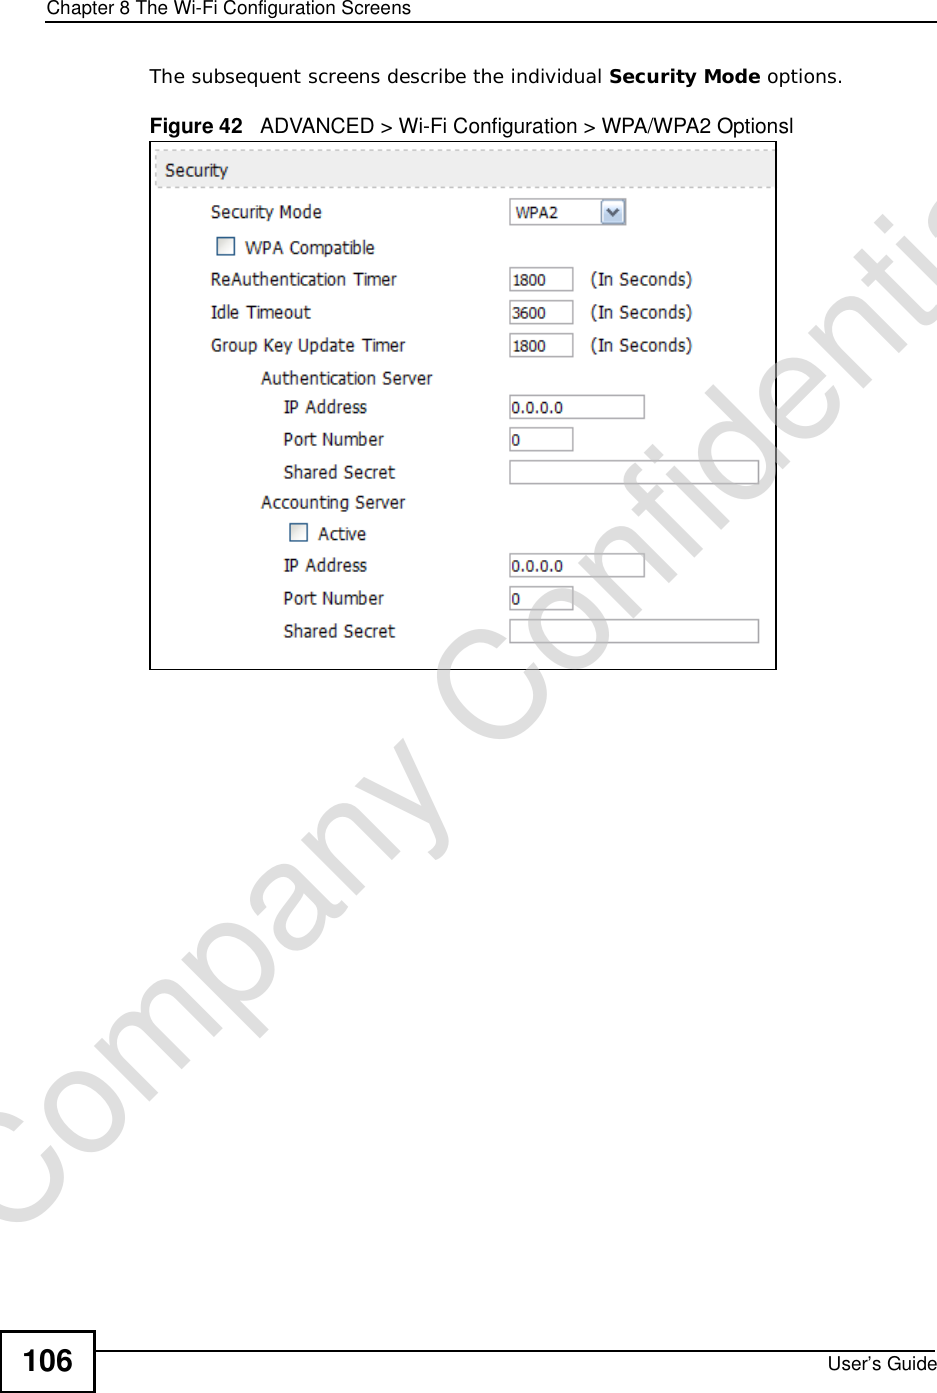 Chapter 8The Wi-Fi Configuration ScreensUser’s Guide106The subsequent screens describe the individual Security Mode options.Figure 42   ADVANCED &gt; Wi-Fi Configuration &gt; WPA/WPA2 OptionslCompany Confidential